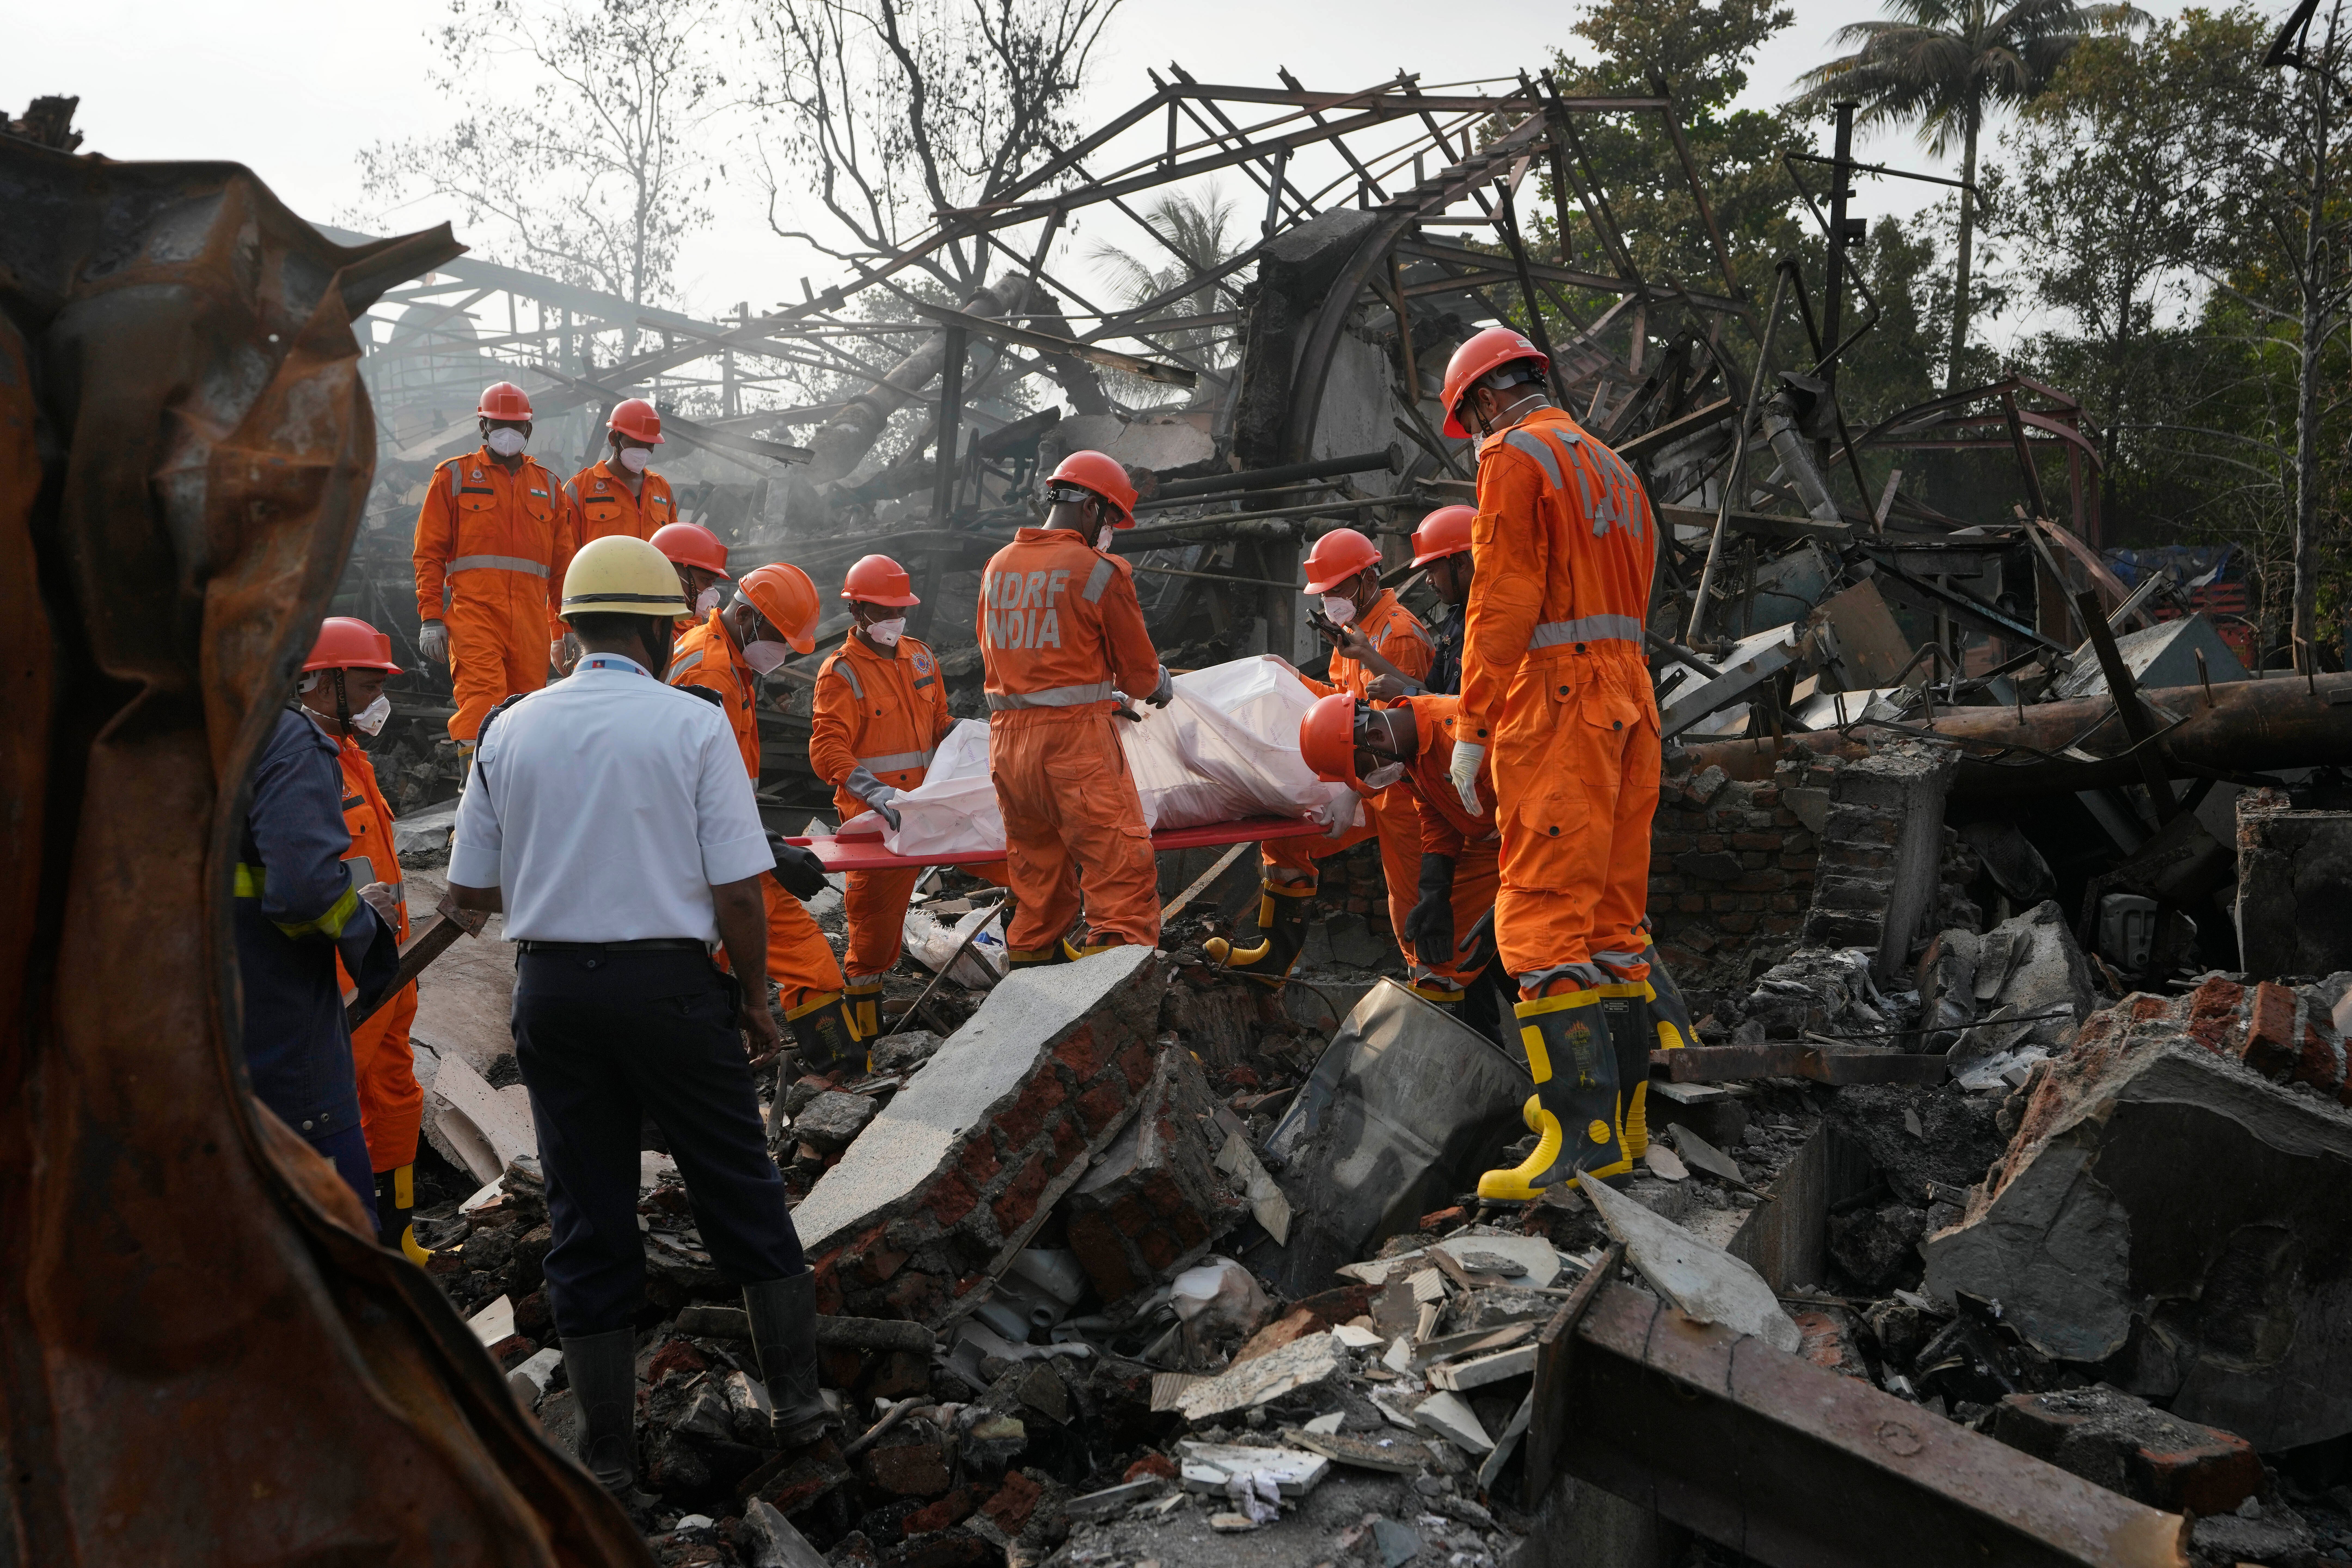 India’s National Disaster Relief Force carry out rescue operations after a factory fire in Thane